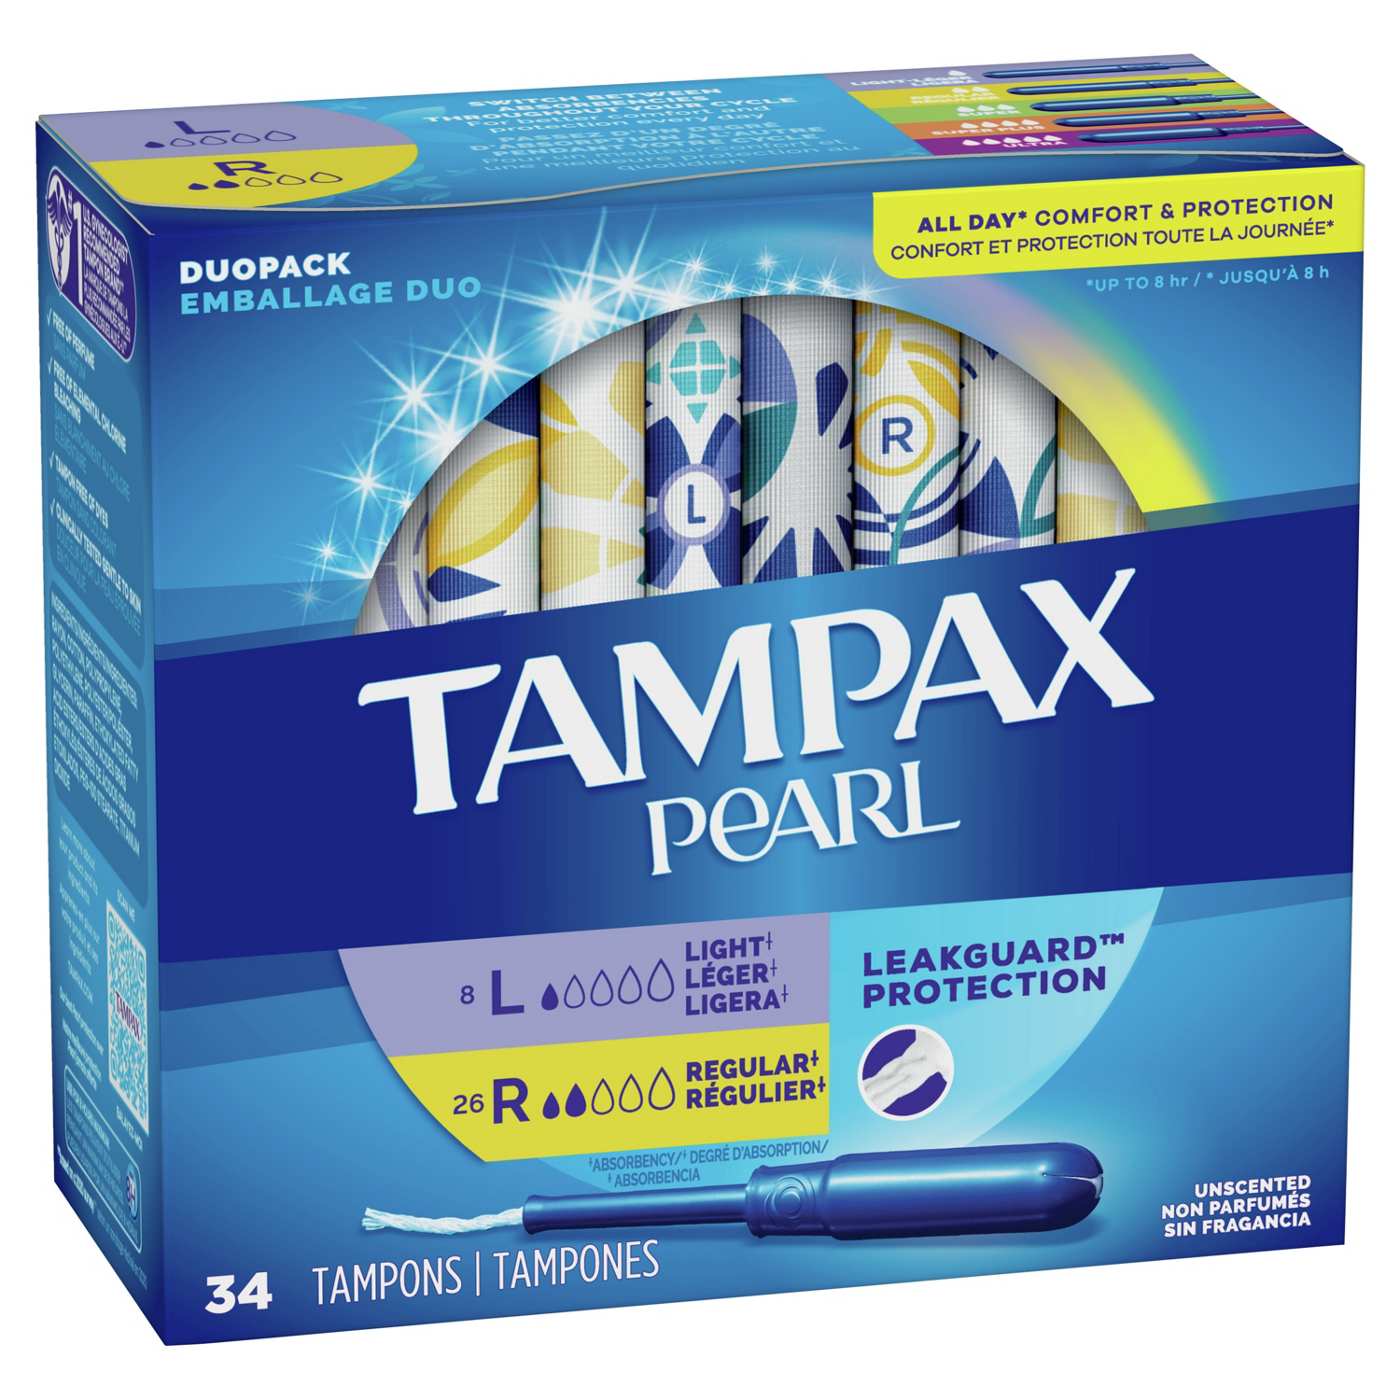 Tampax Pearl Tampons Duo Pack, Light/Regular Absorbency, Unscented; image 5 of 5